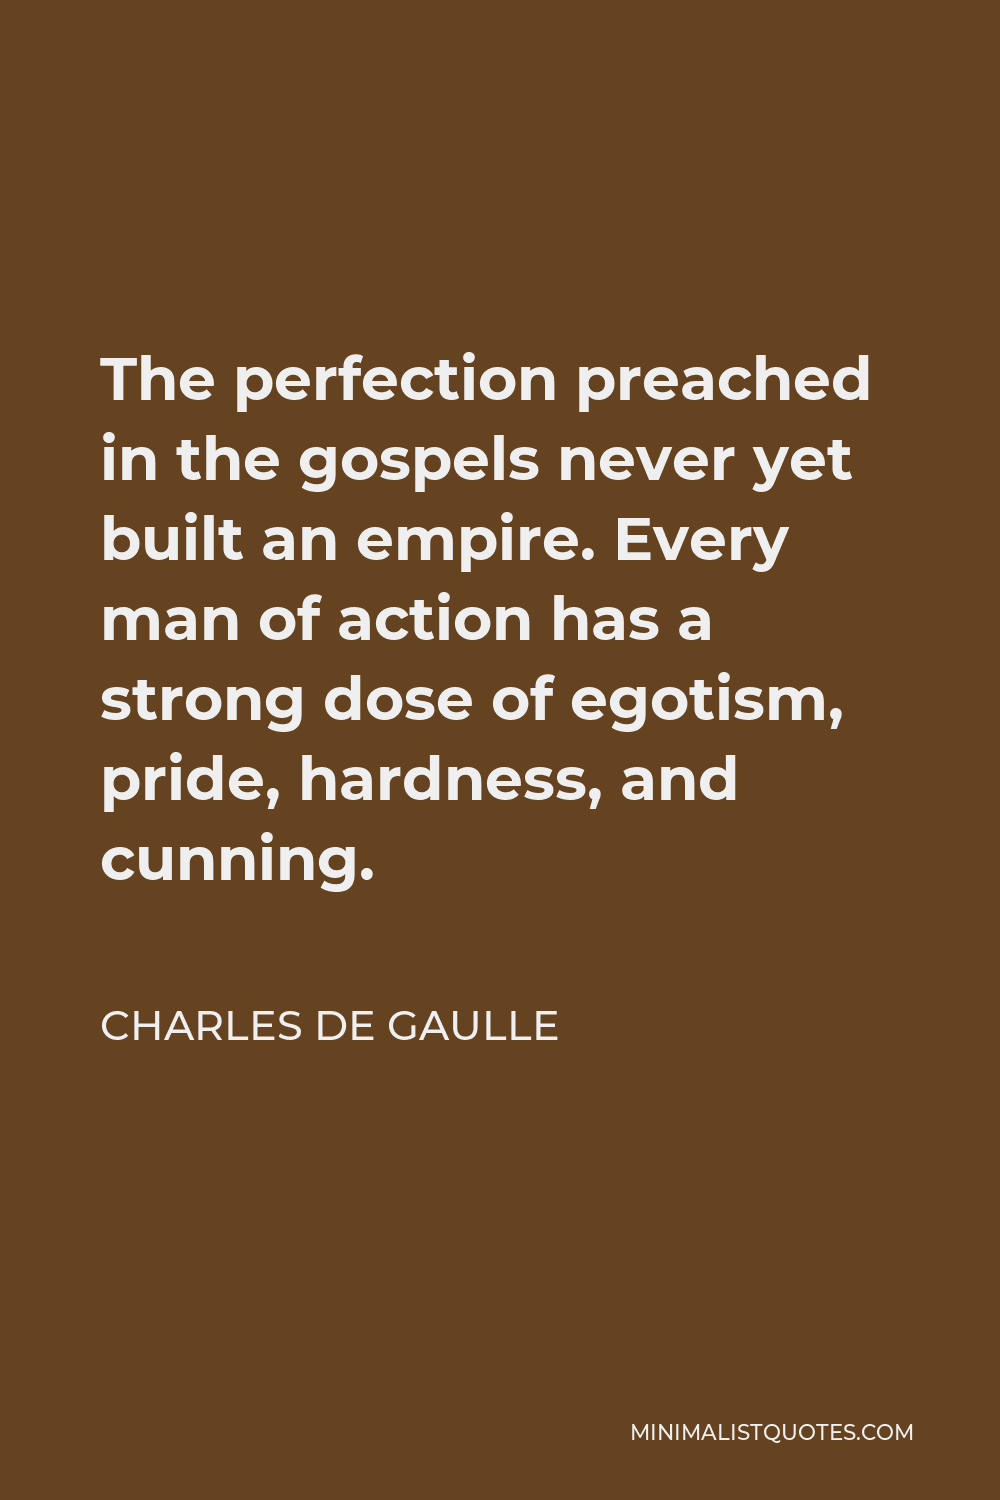 Charles de Gaulle Quote - The perfection preached in the gospels never yet built an empire. Every man of action has a strong dose of egotism, pride, hardness, and cunning.